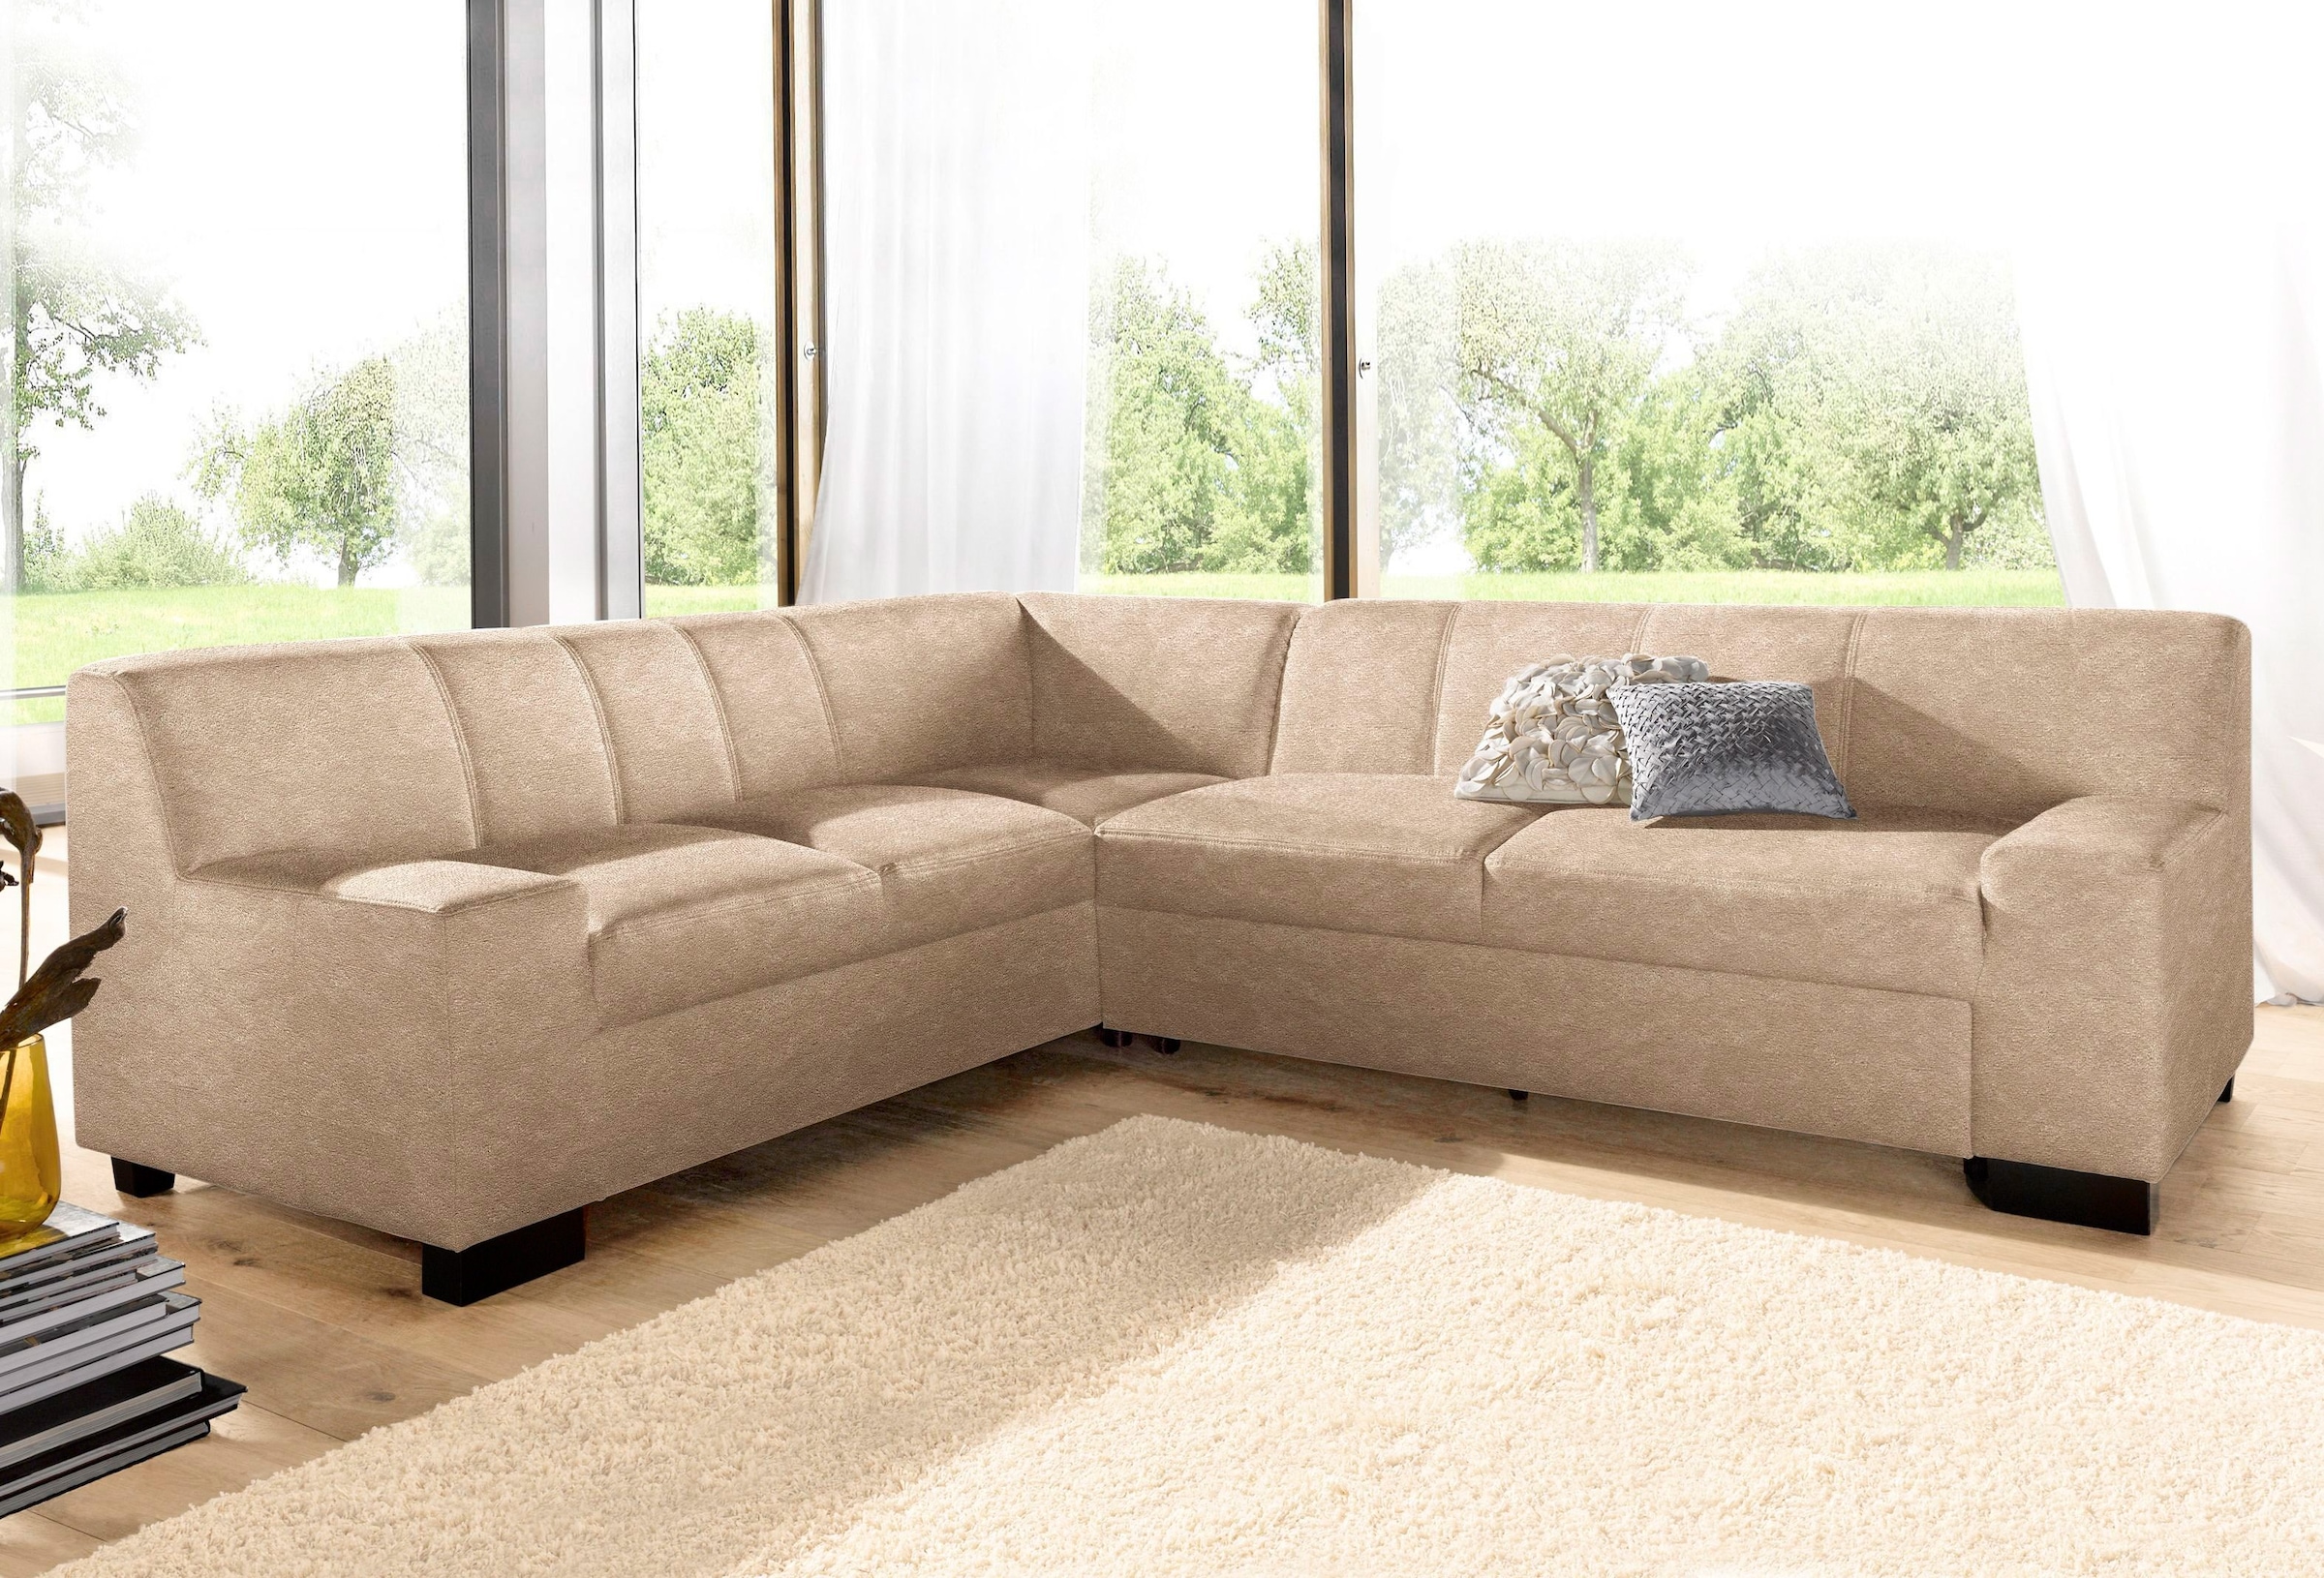 DOMO collection Ecksofa »Norma L-Form«, wahlweise mit Bettfunktion